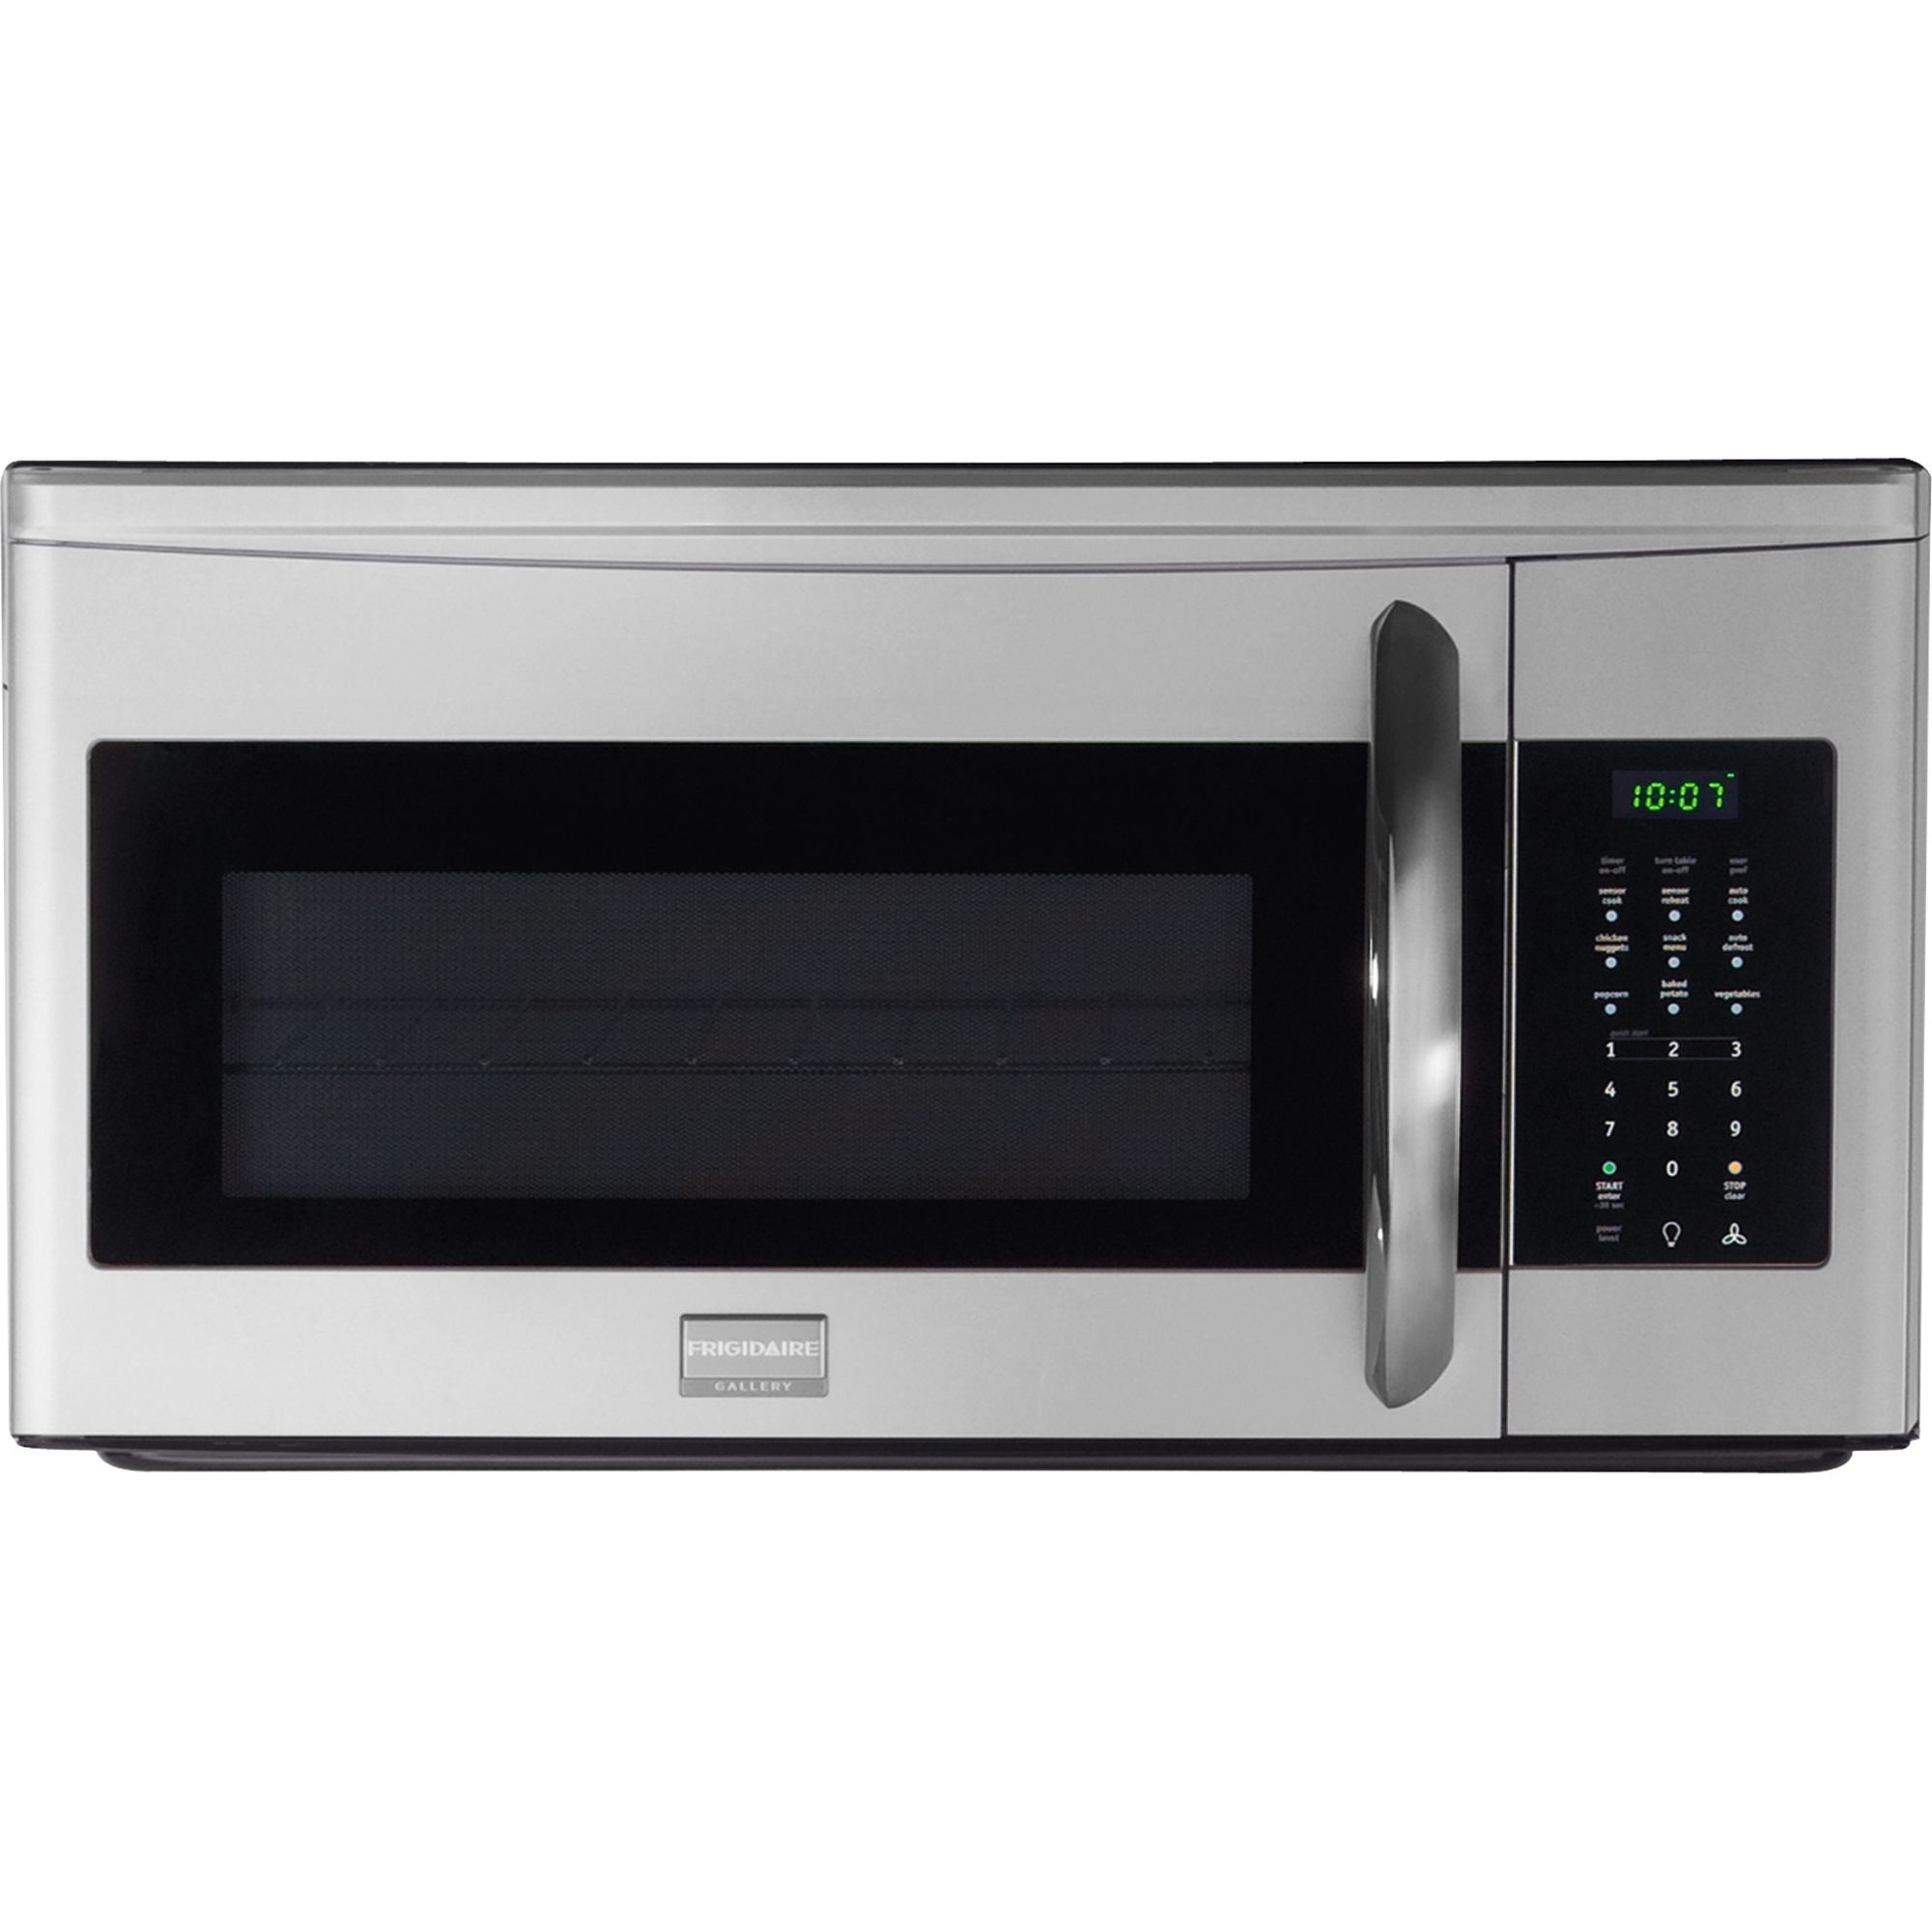 Frigidaire 30 1.7 cu. ft. Microhood Combination Microwave Oven (FGMV17) Stainless steel